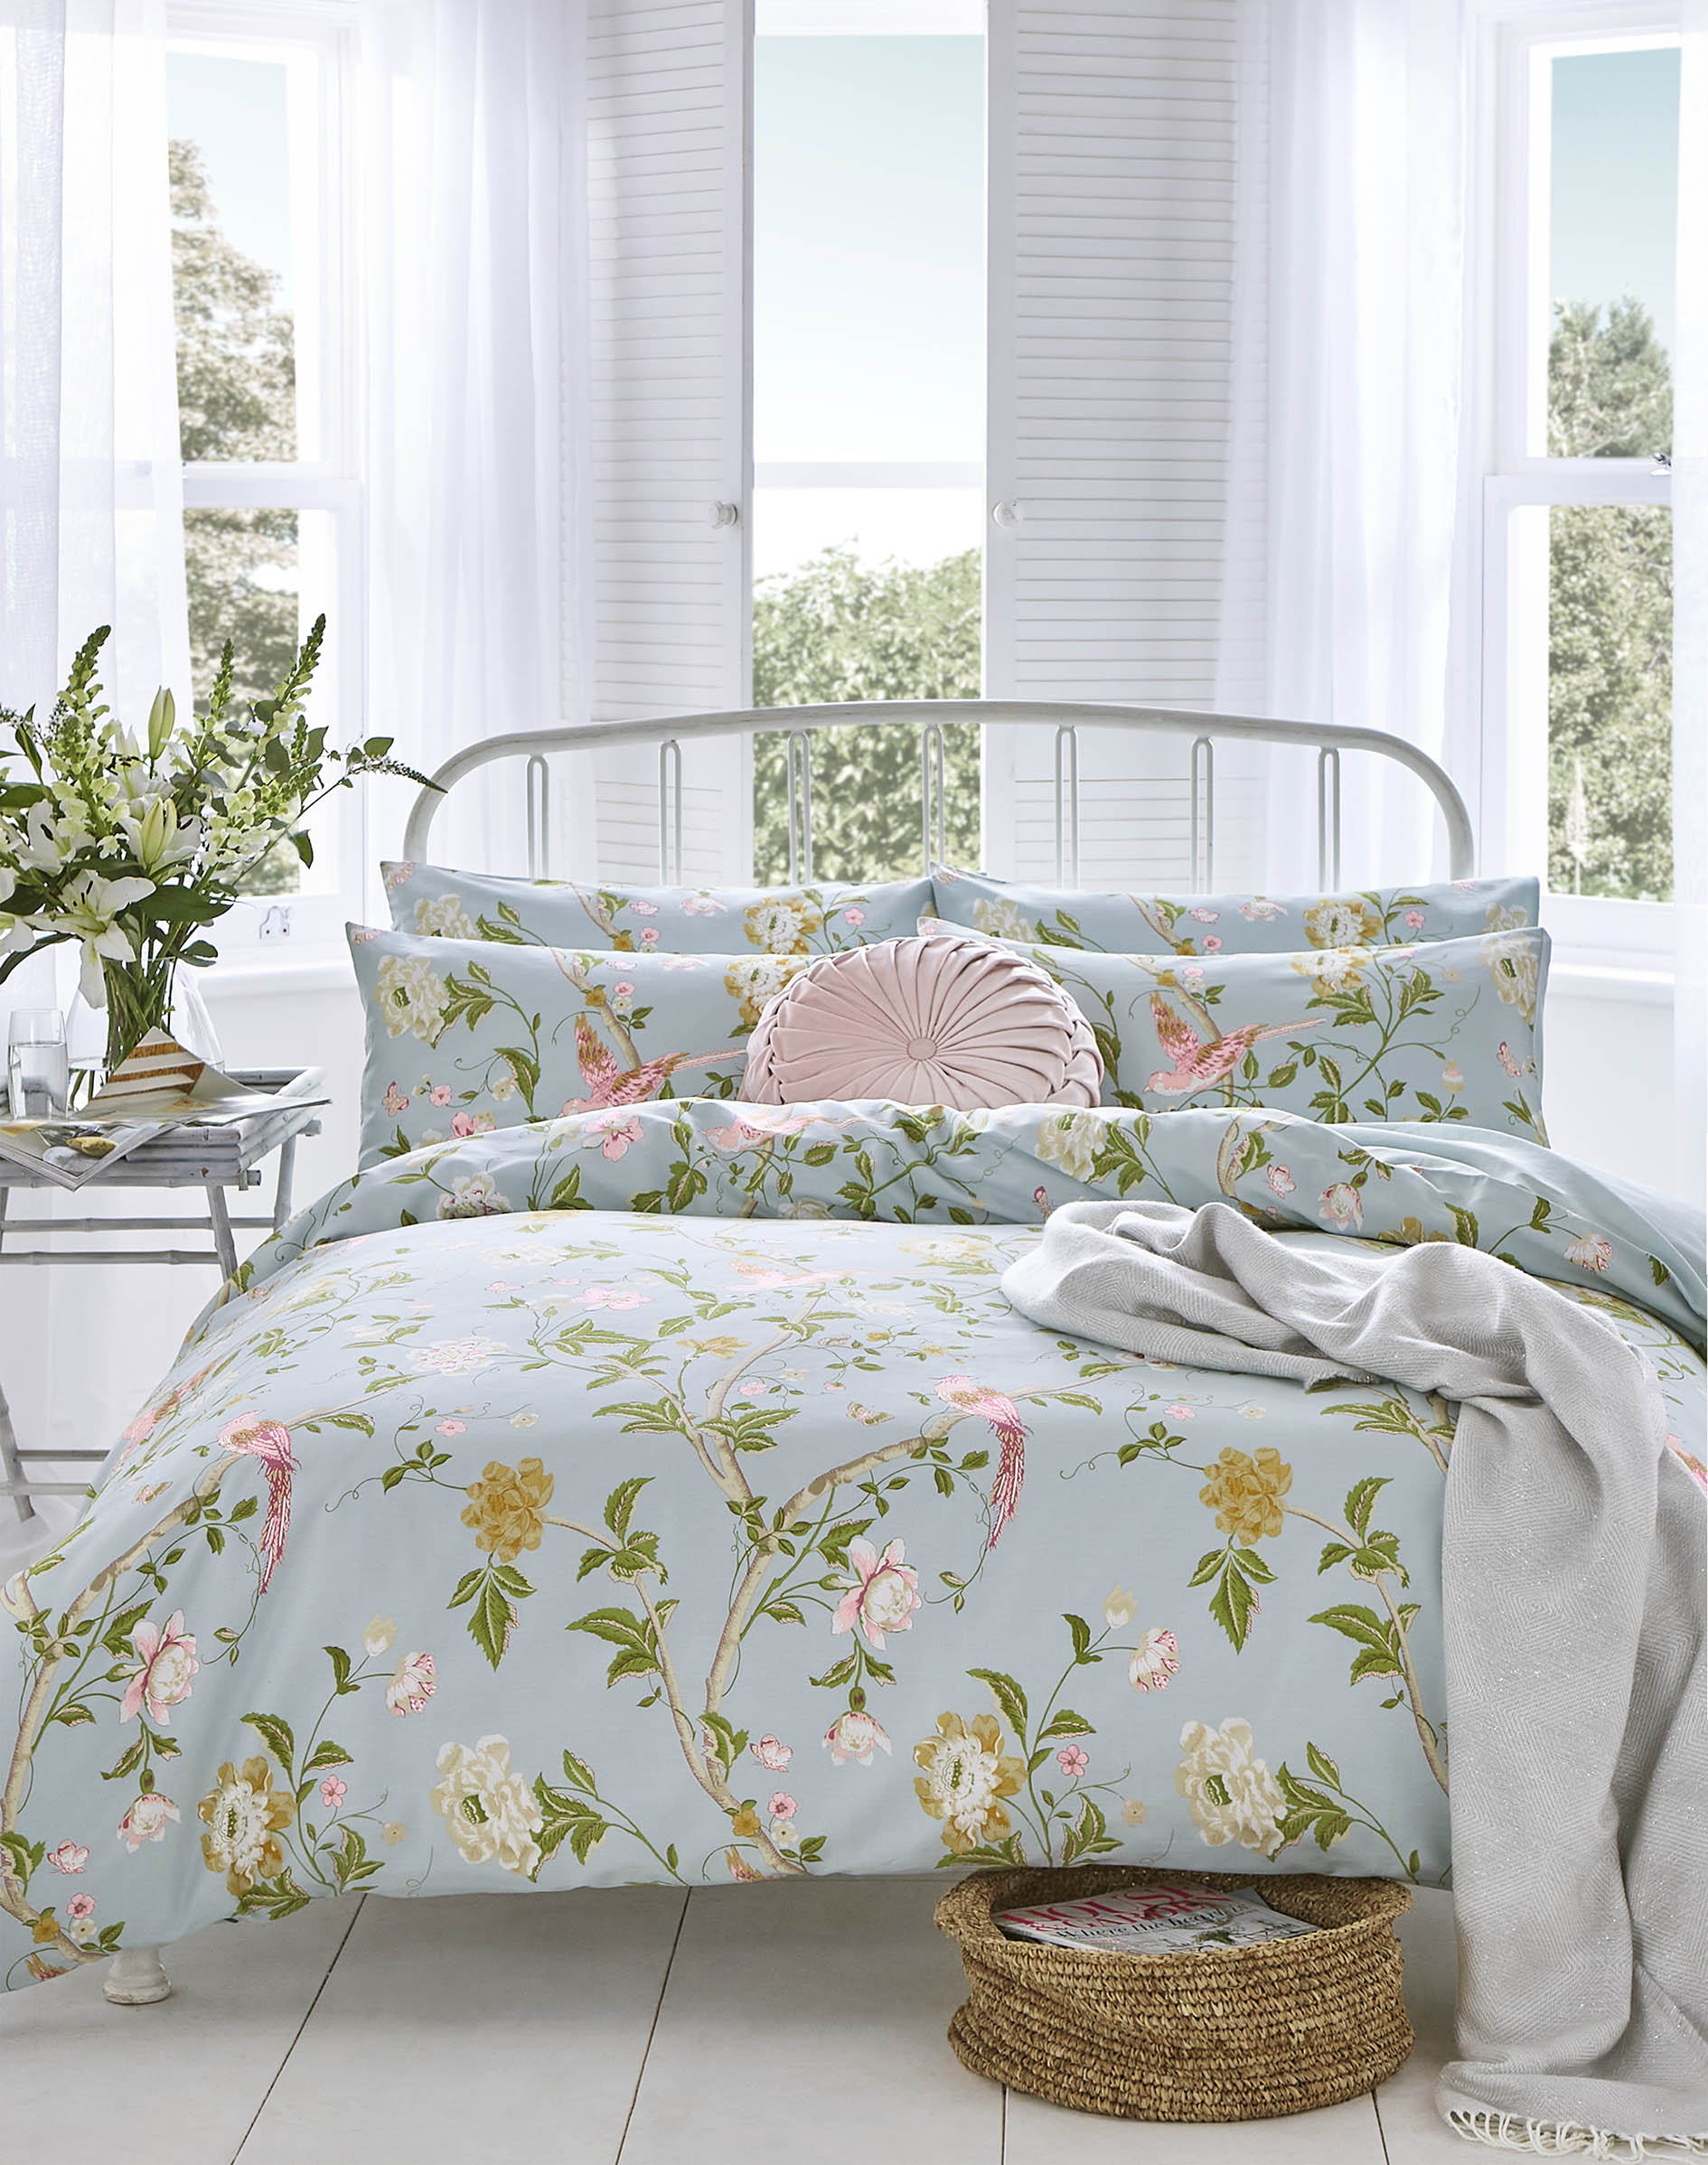 The Laura Ashley summer palace duvet set in duck egg is beautifully floral and spring like with lovely birds and natural elements in the design made in 200TC soft and luxurious.